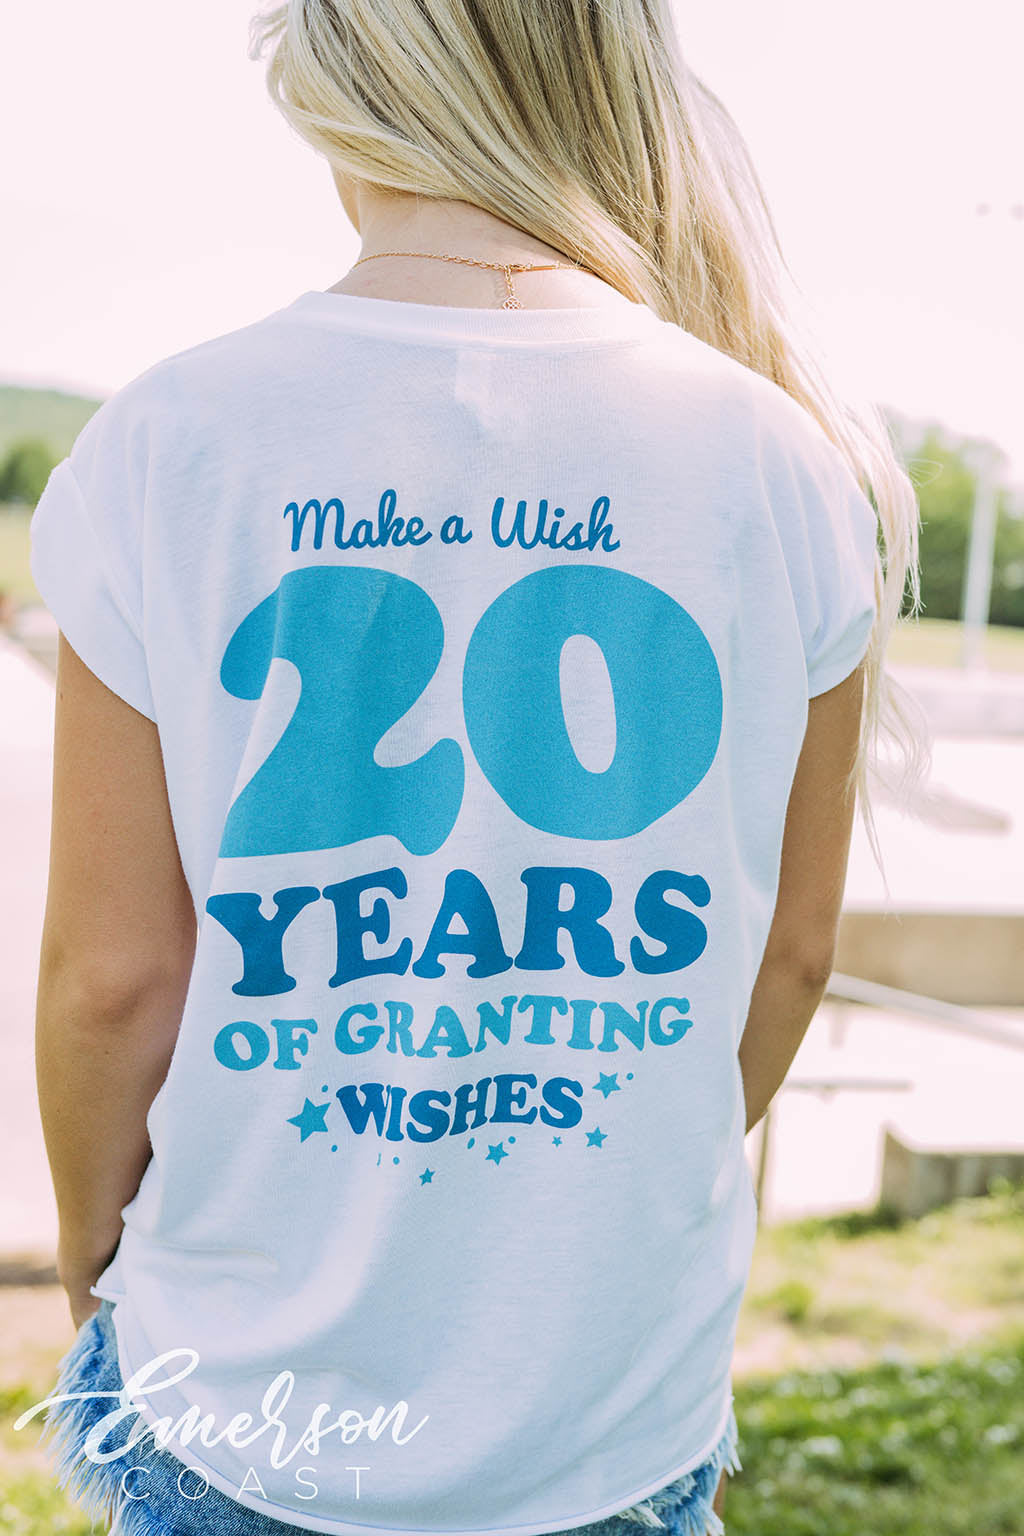 Chi Omega Philanthropy Granting Wishes Tee